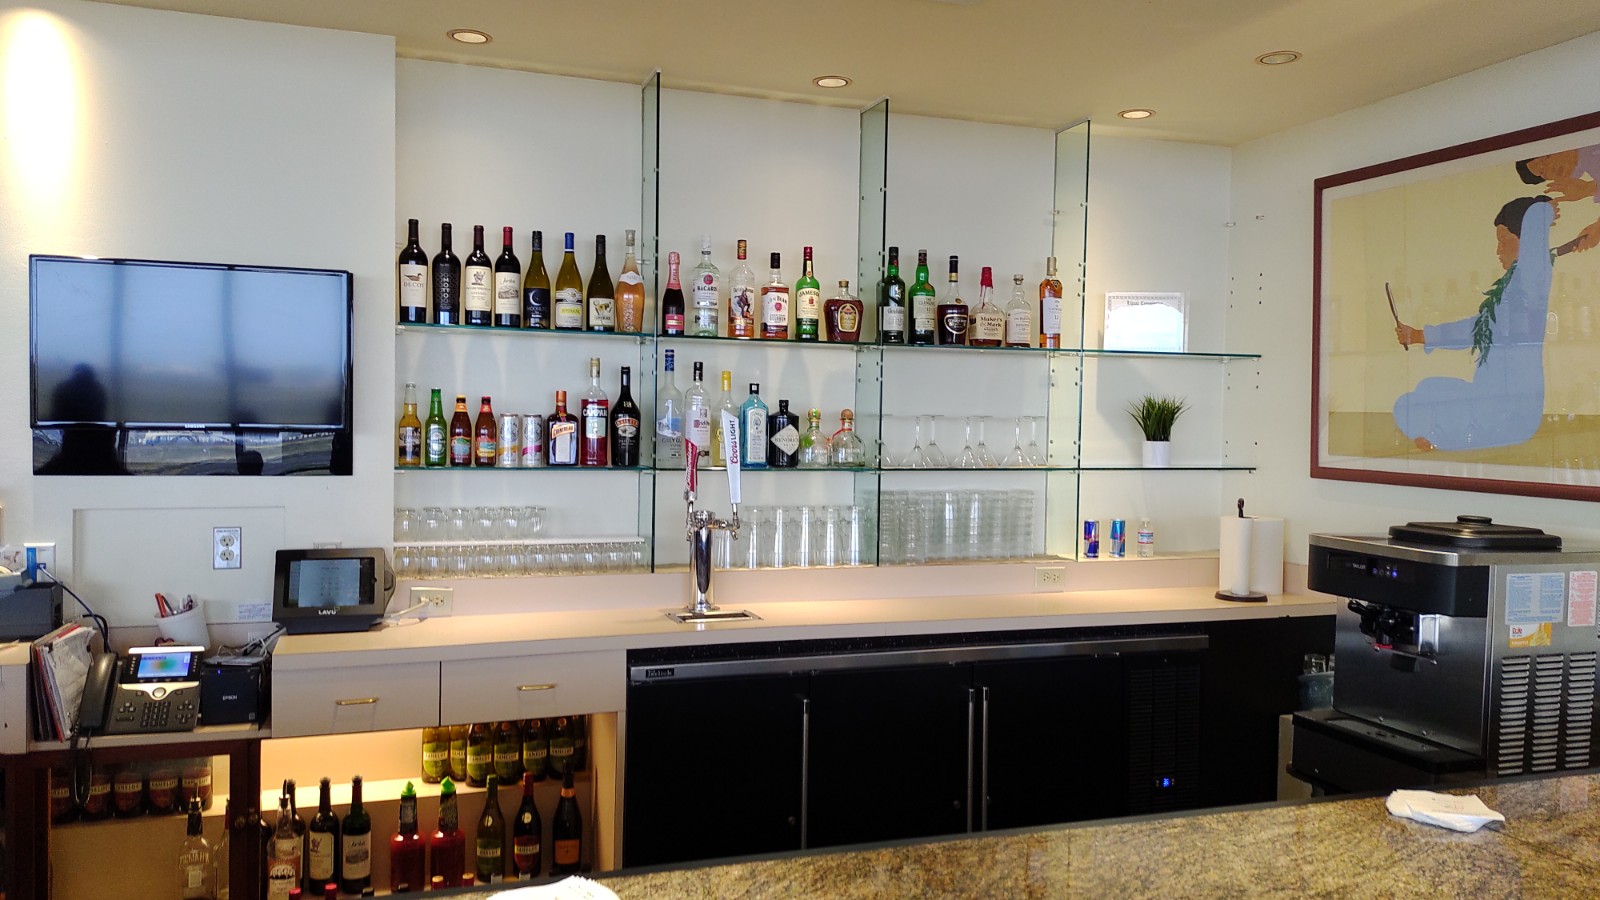 PICTURE OF THE BAR.